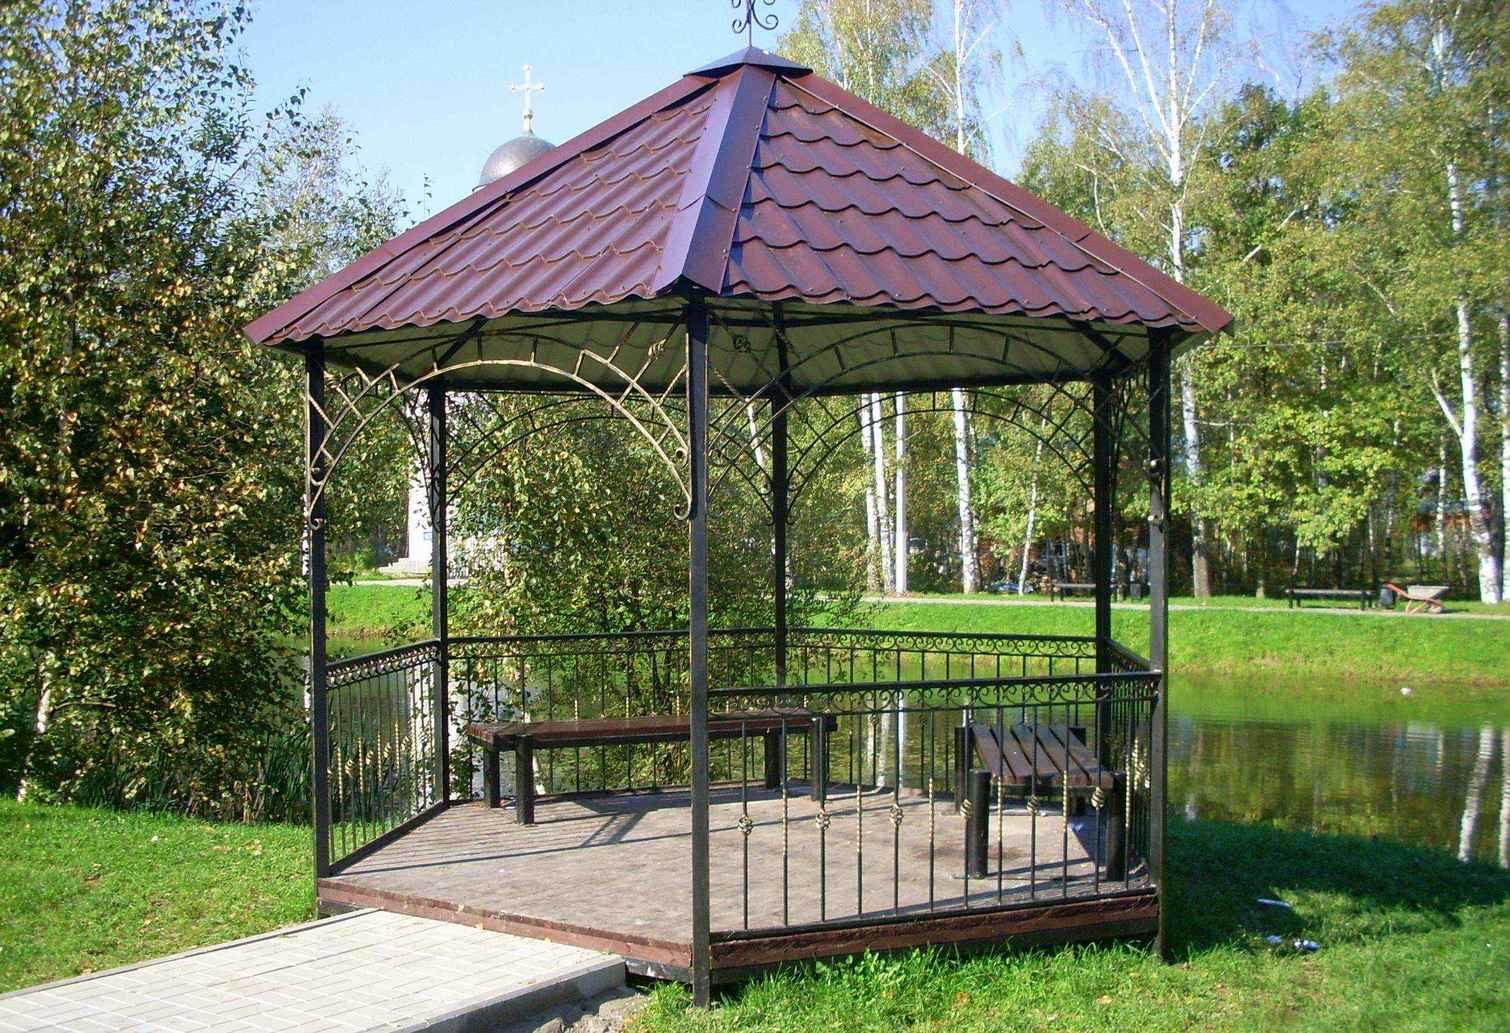 variant of the unusual design of the gazebo